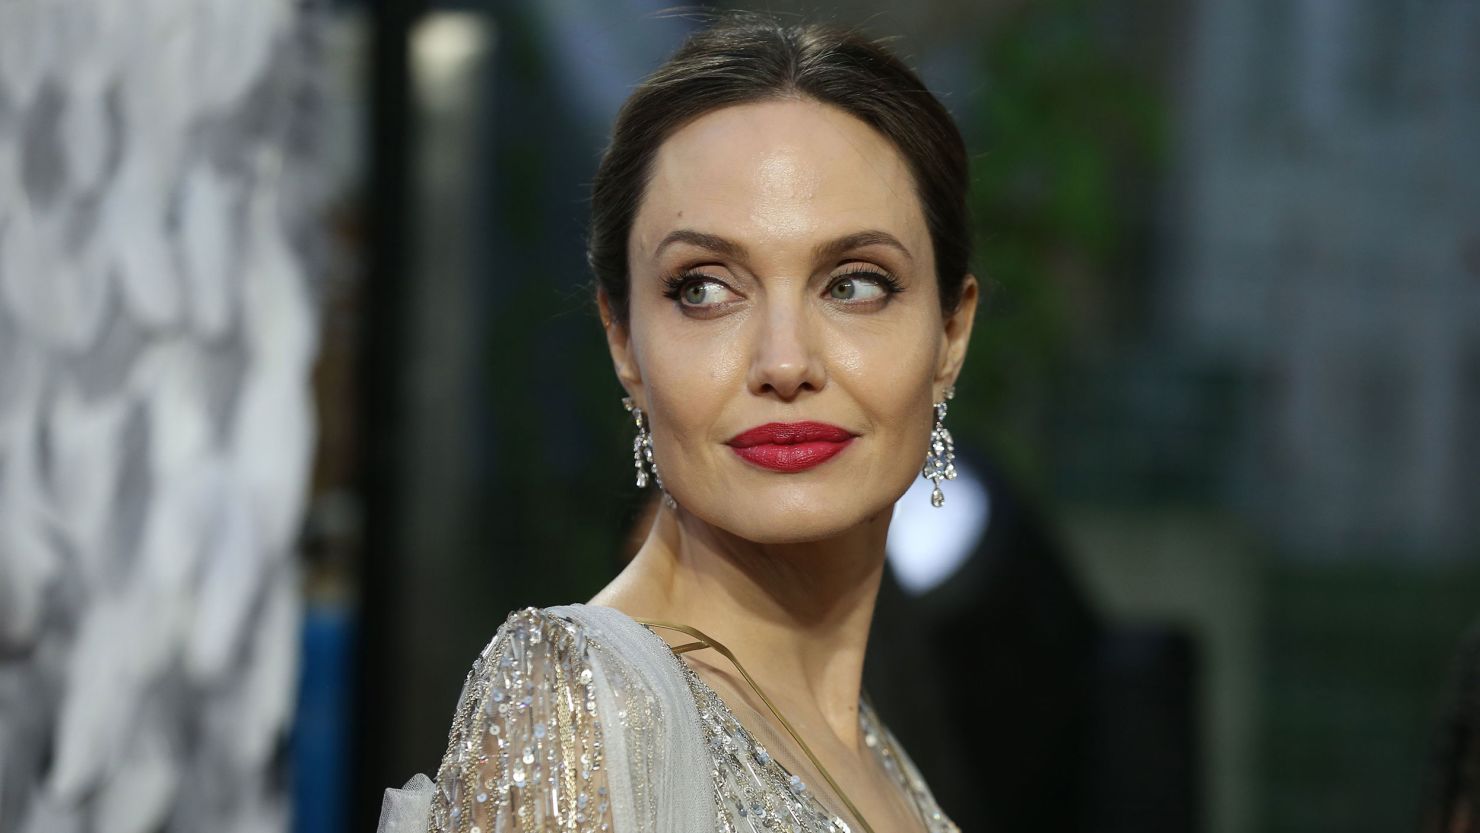 Angelia Jolie joined Time magazine as a contributing editor last year.